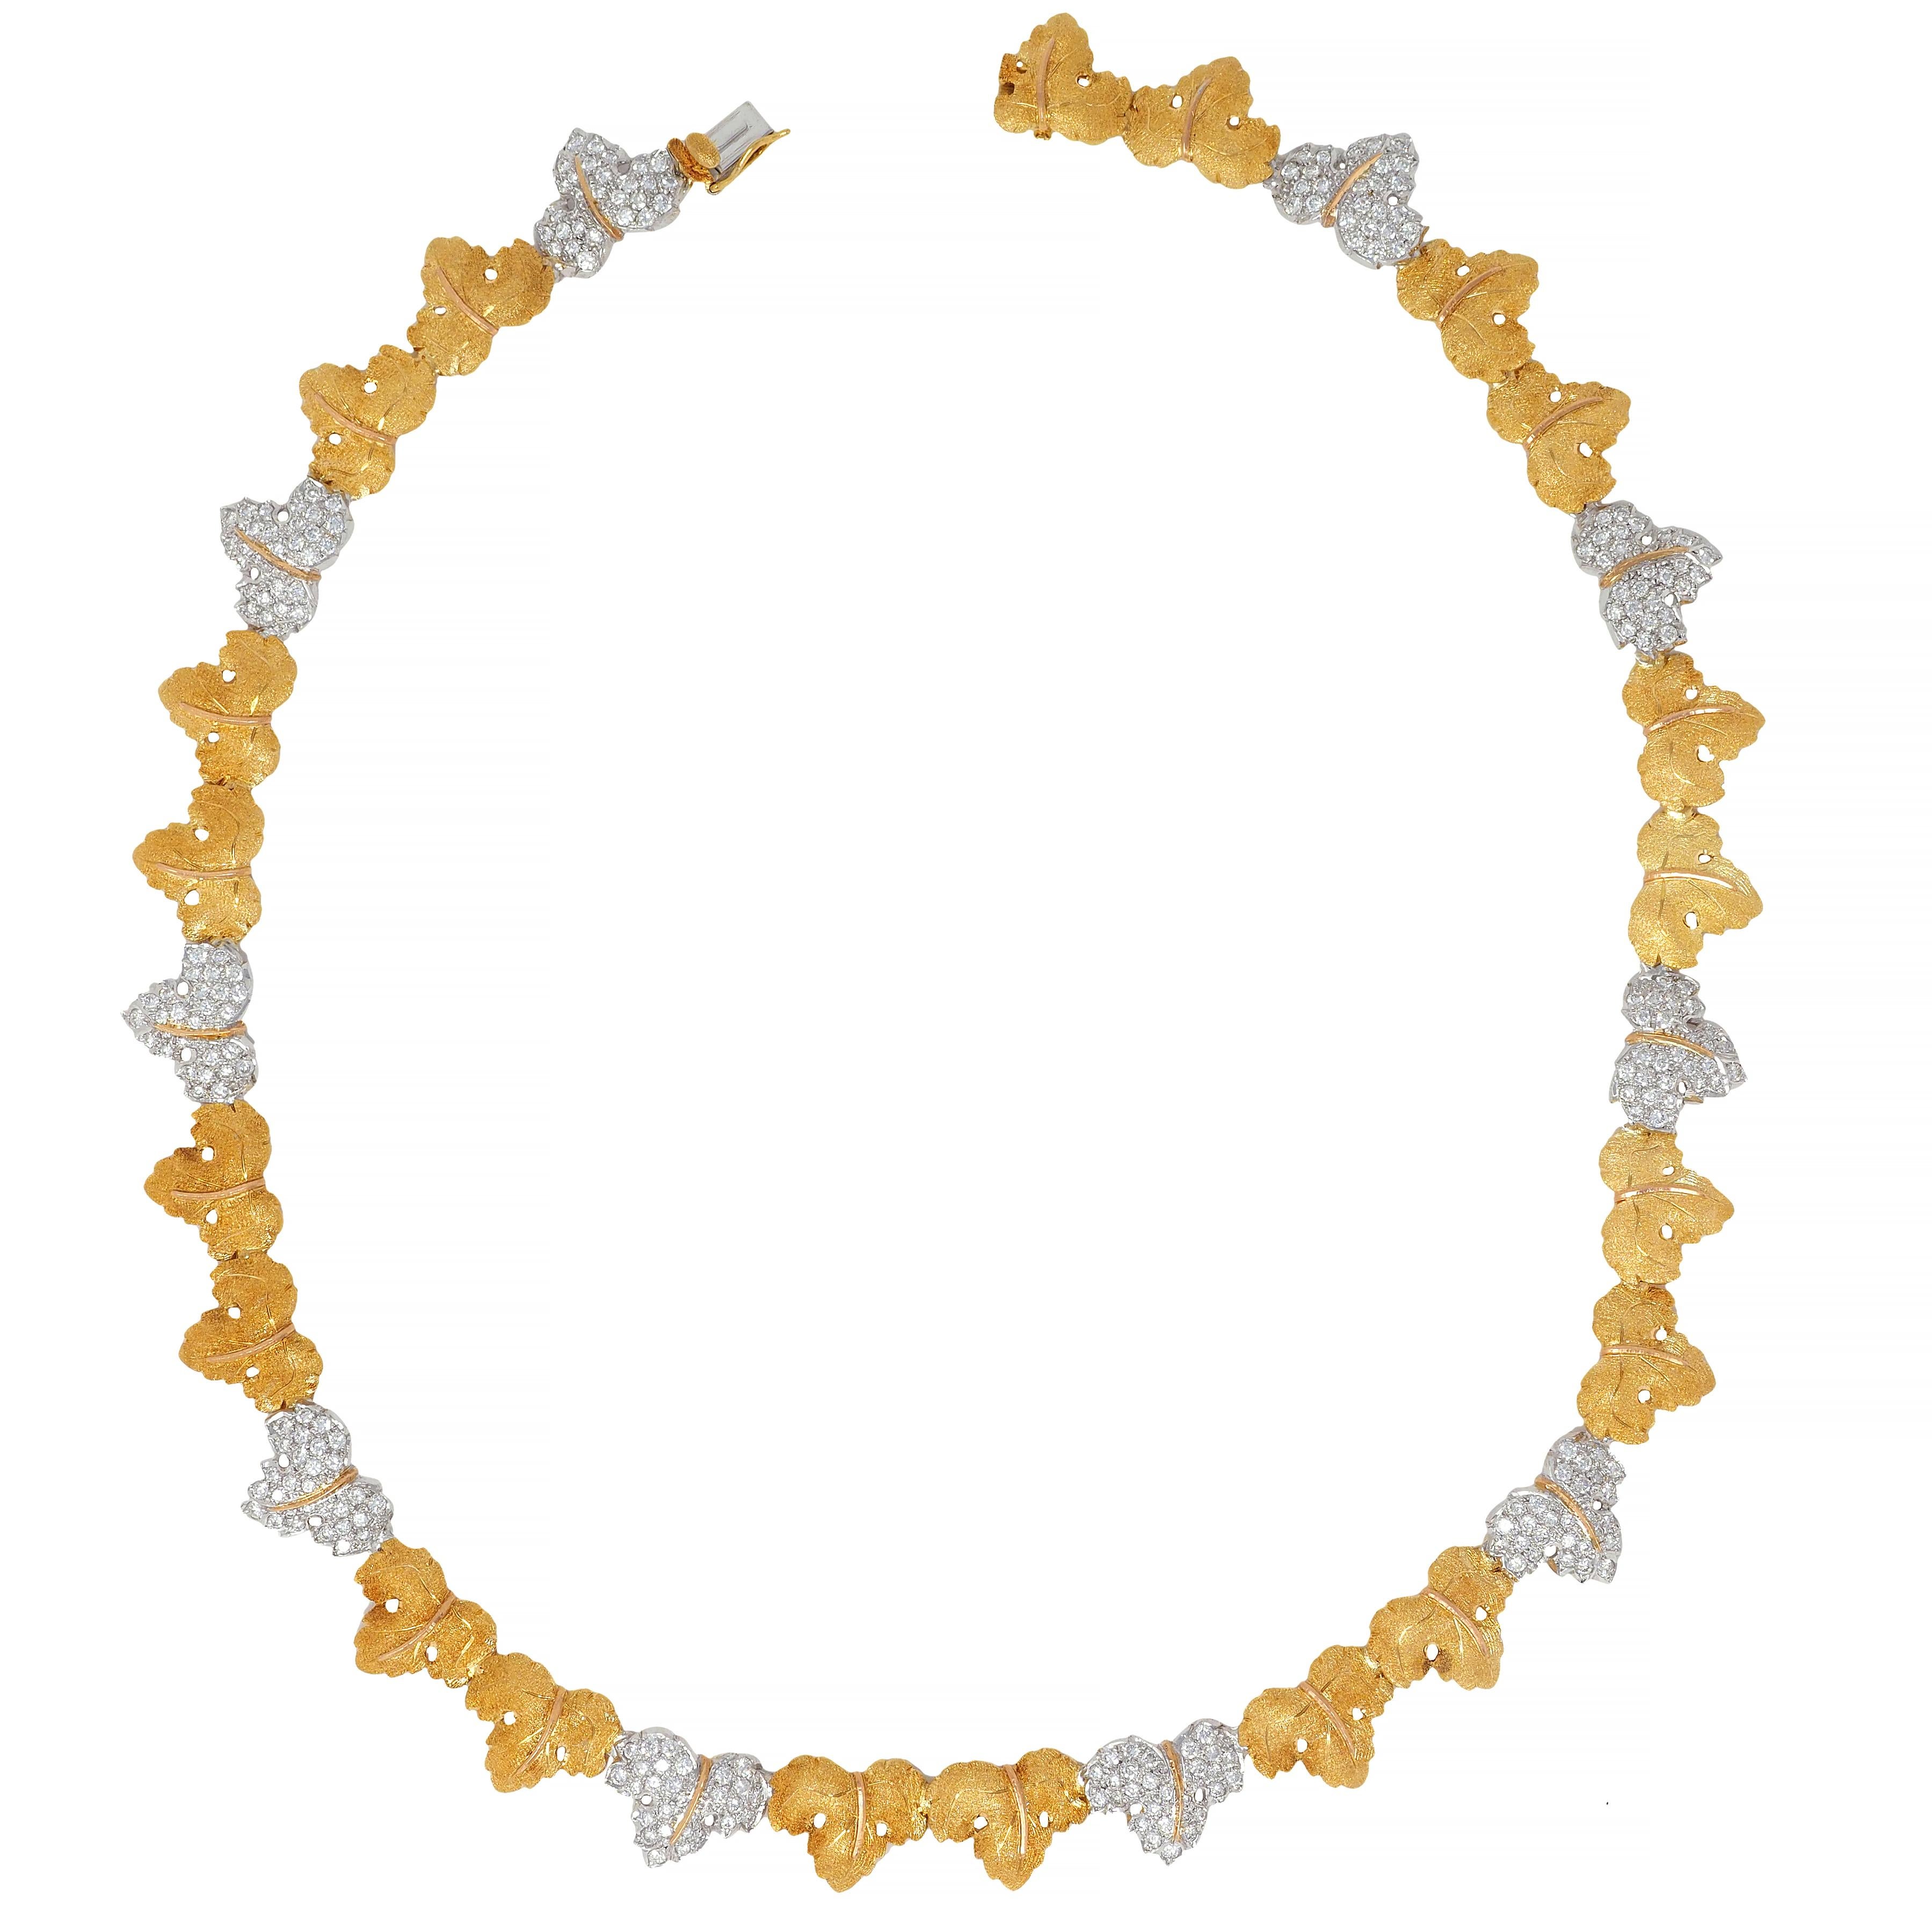 Designed as a garland of grape leaves alternating with white and yellow gold
Featuring round brilliant cut diamonds bead set in white gold leaves
Weighing approximately 4.50 carats total - G/H in color with VS2 clarity
With fine segrinato texture